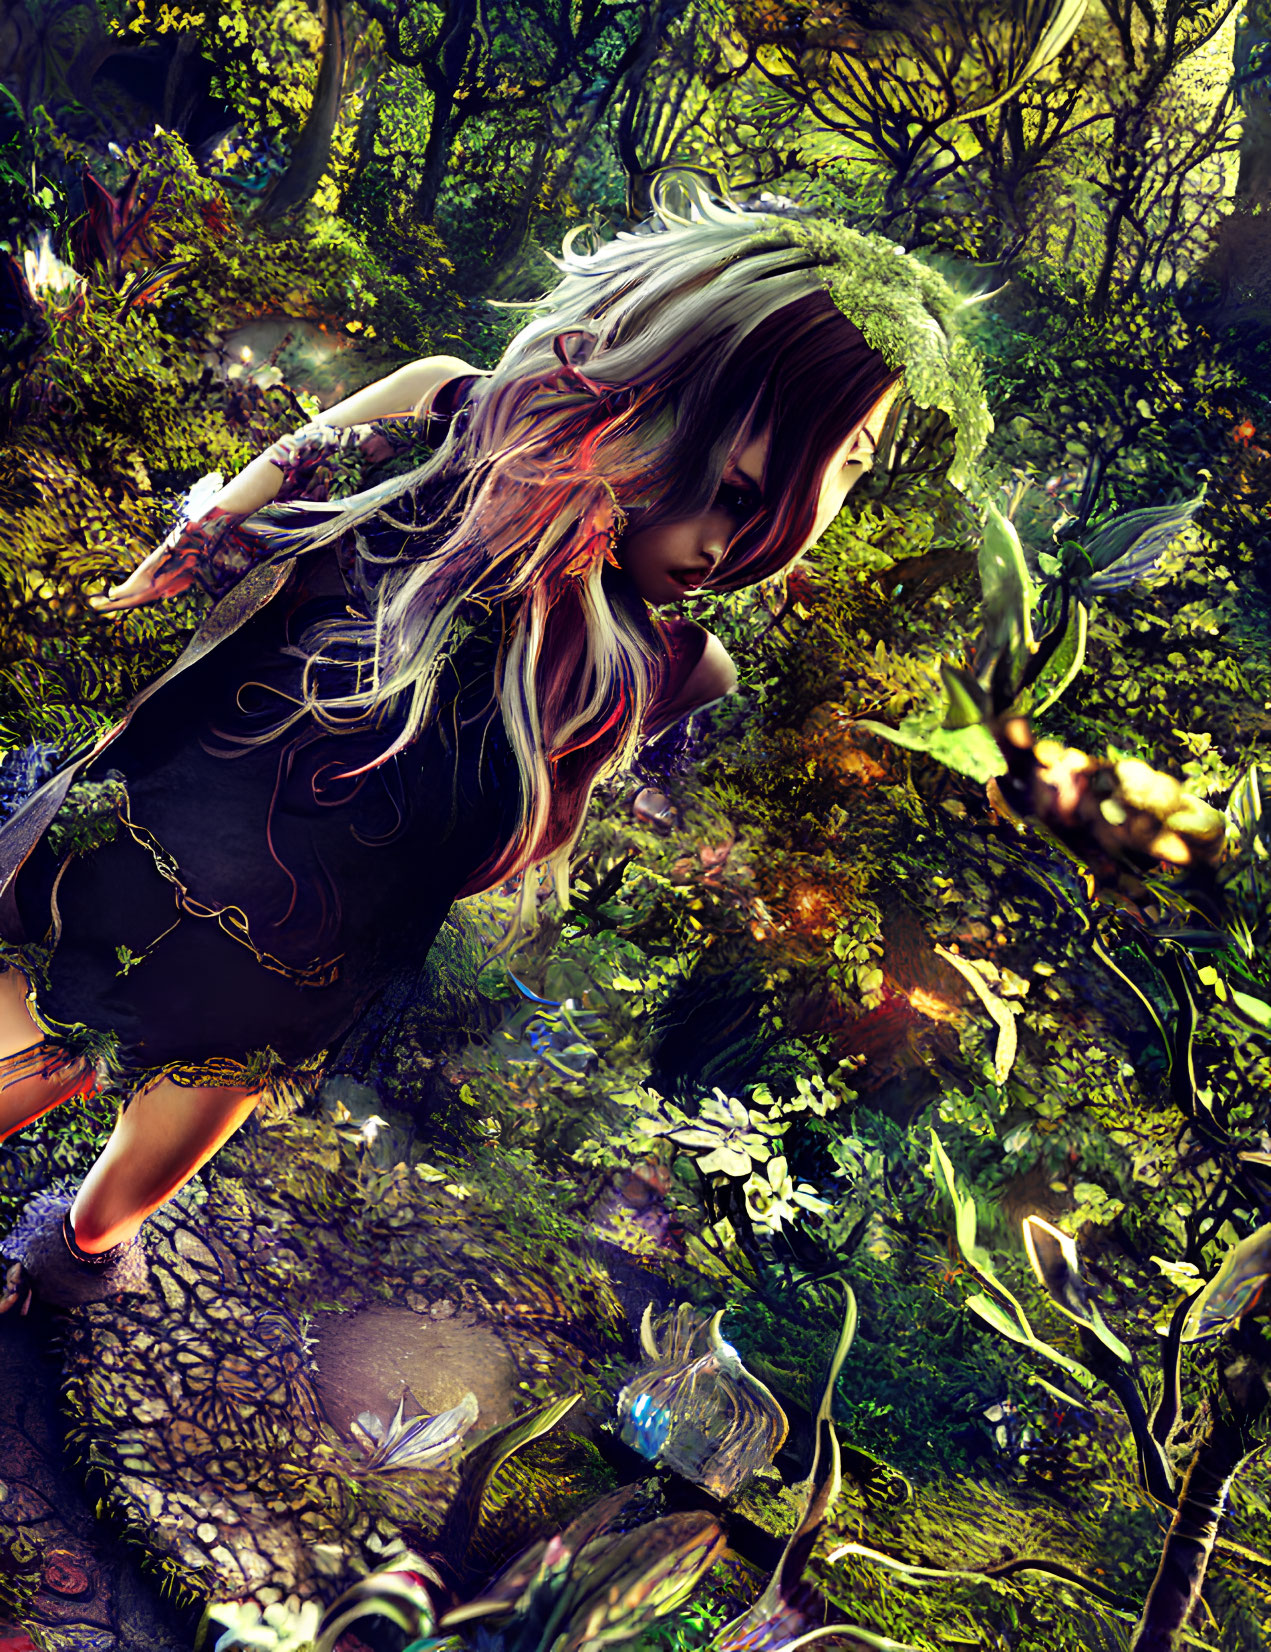 Multicolored hair girl in vibrant enchanted forest with intricate flora